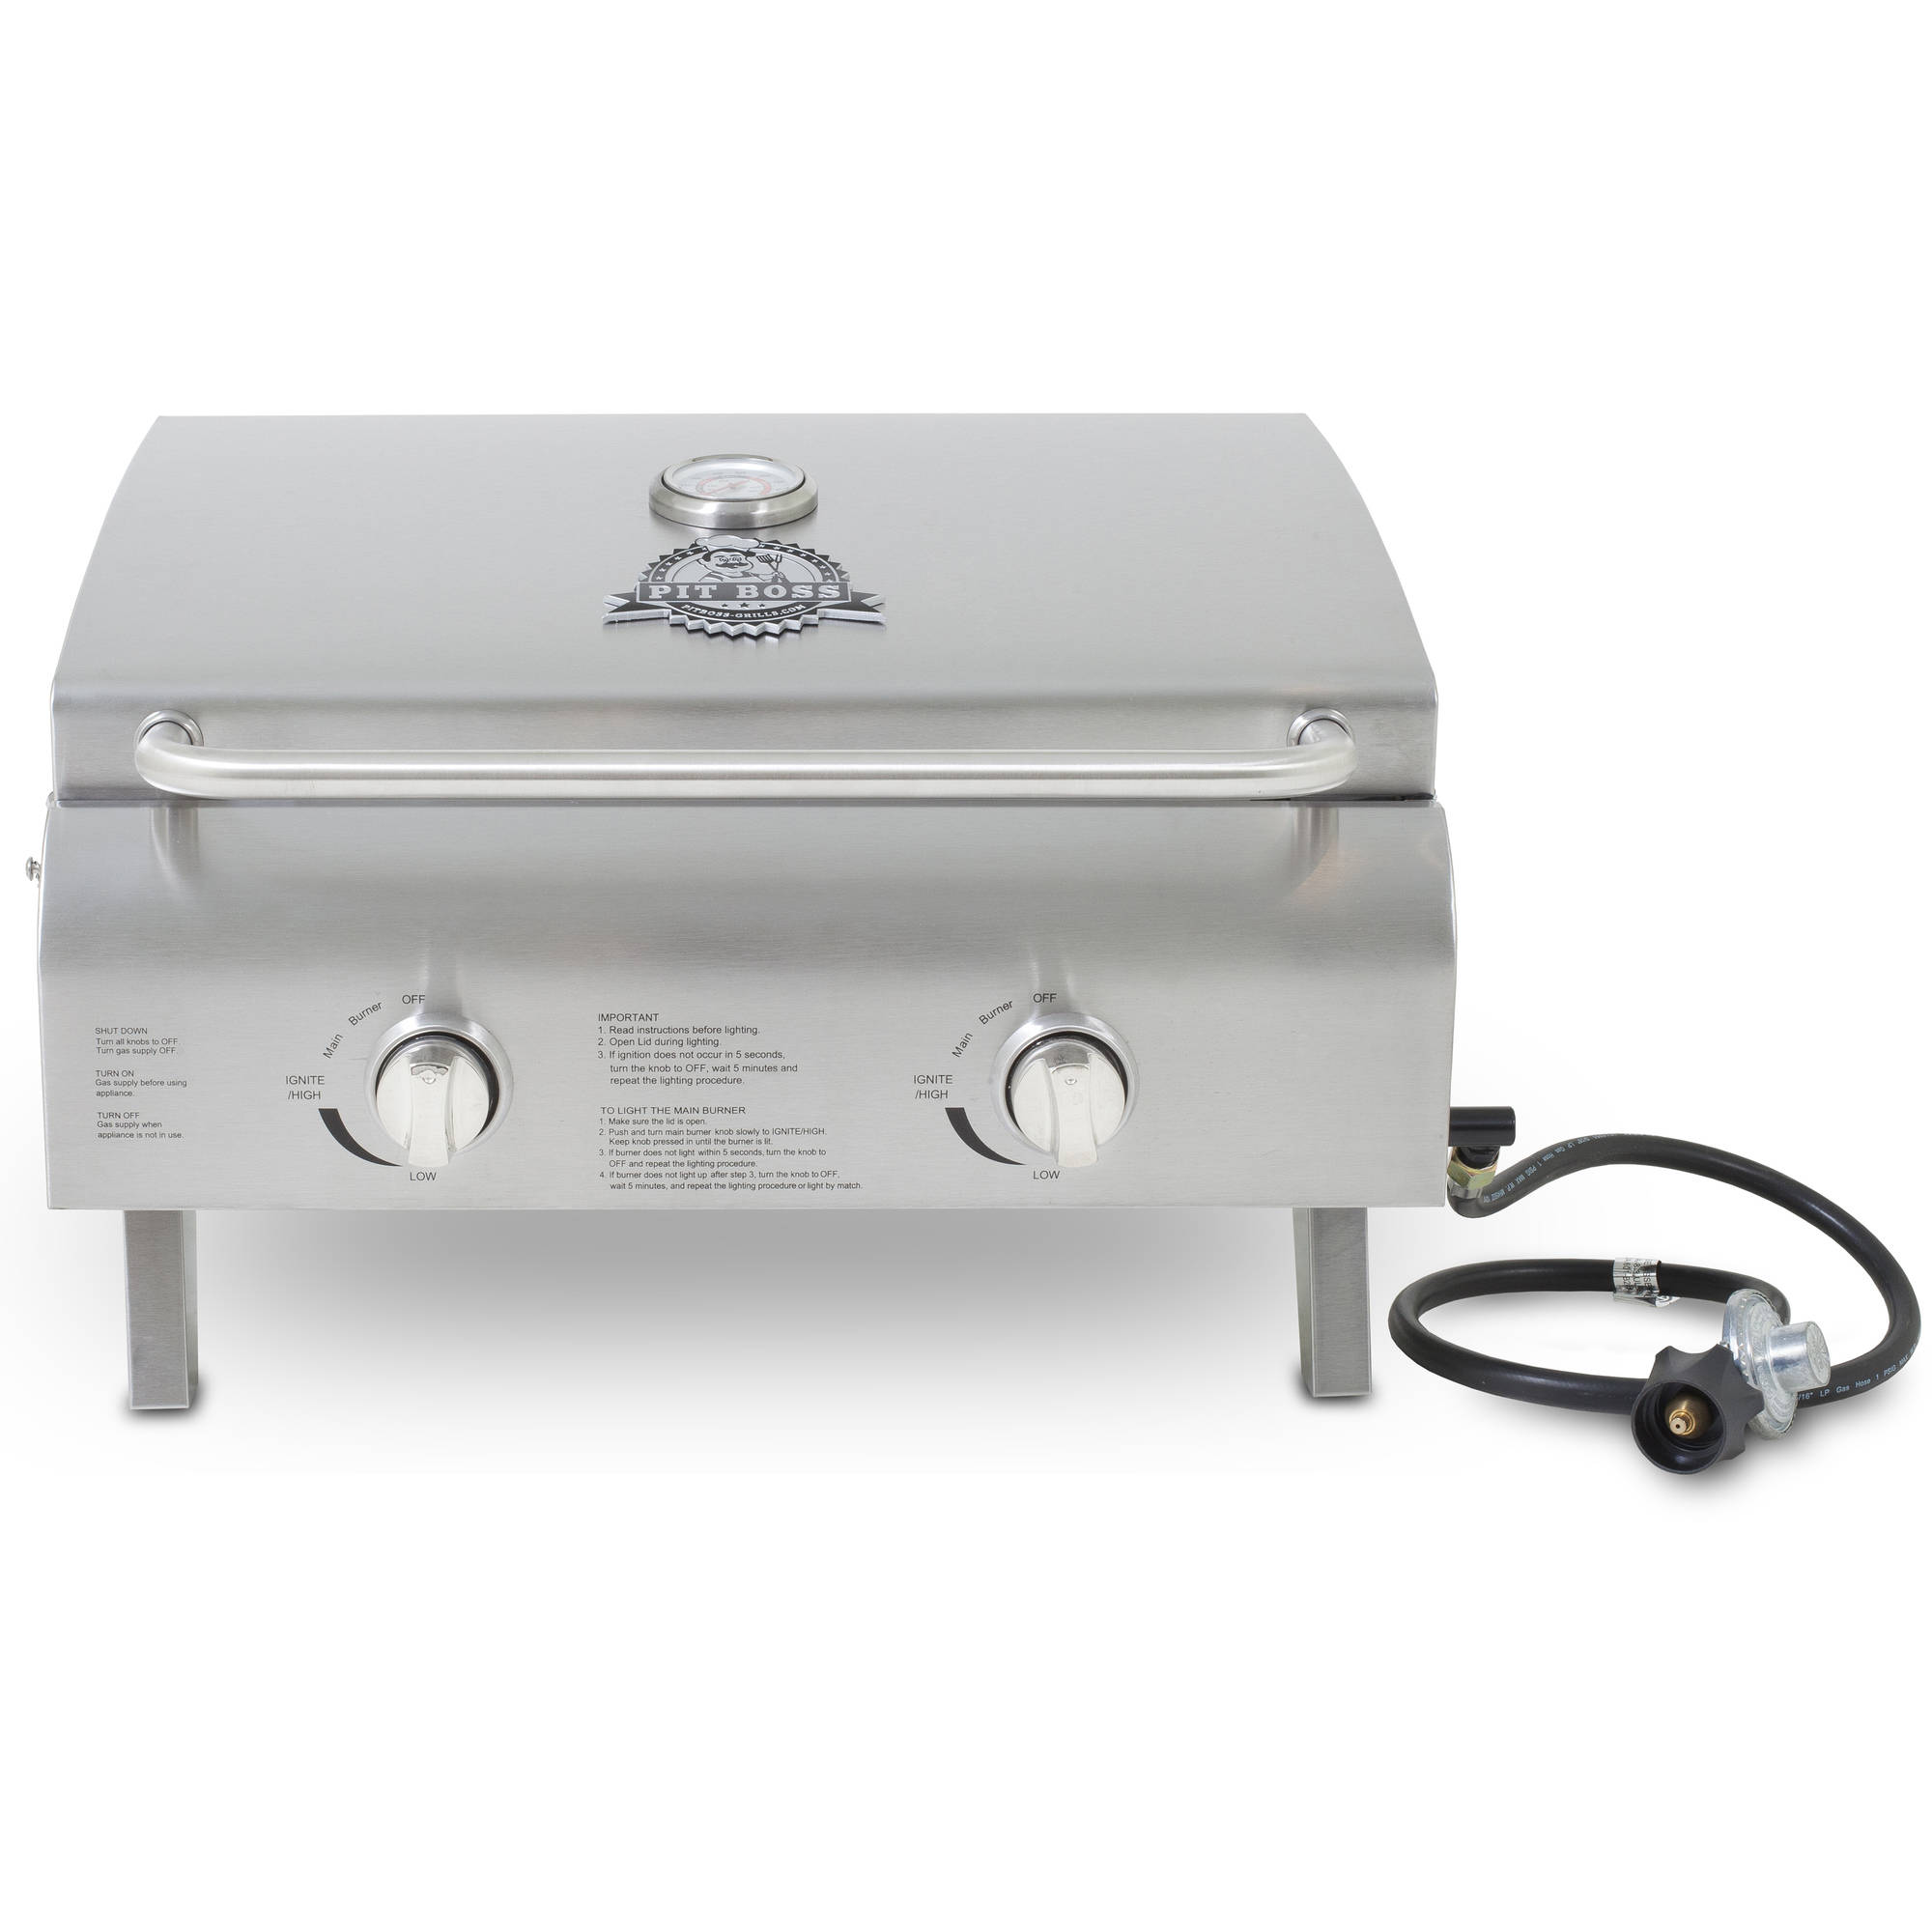 Pit Boss 2-Burner Portable Gas Grill, Stainless Steel - image 1 of 5